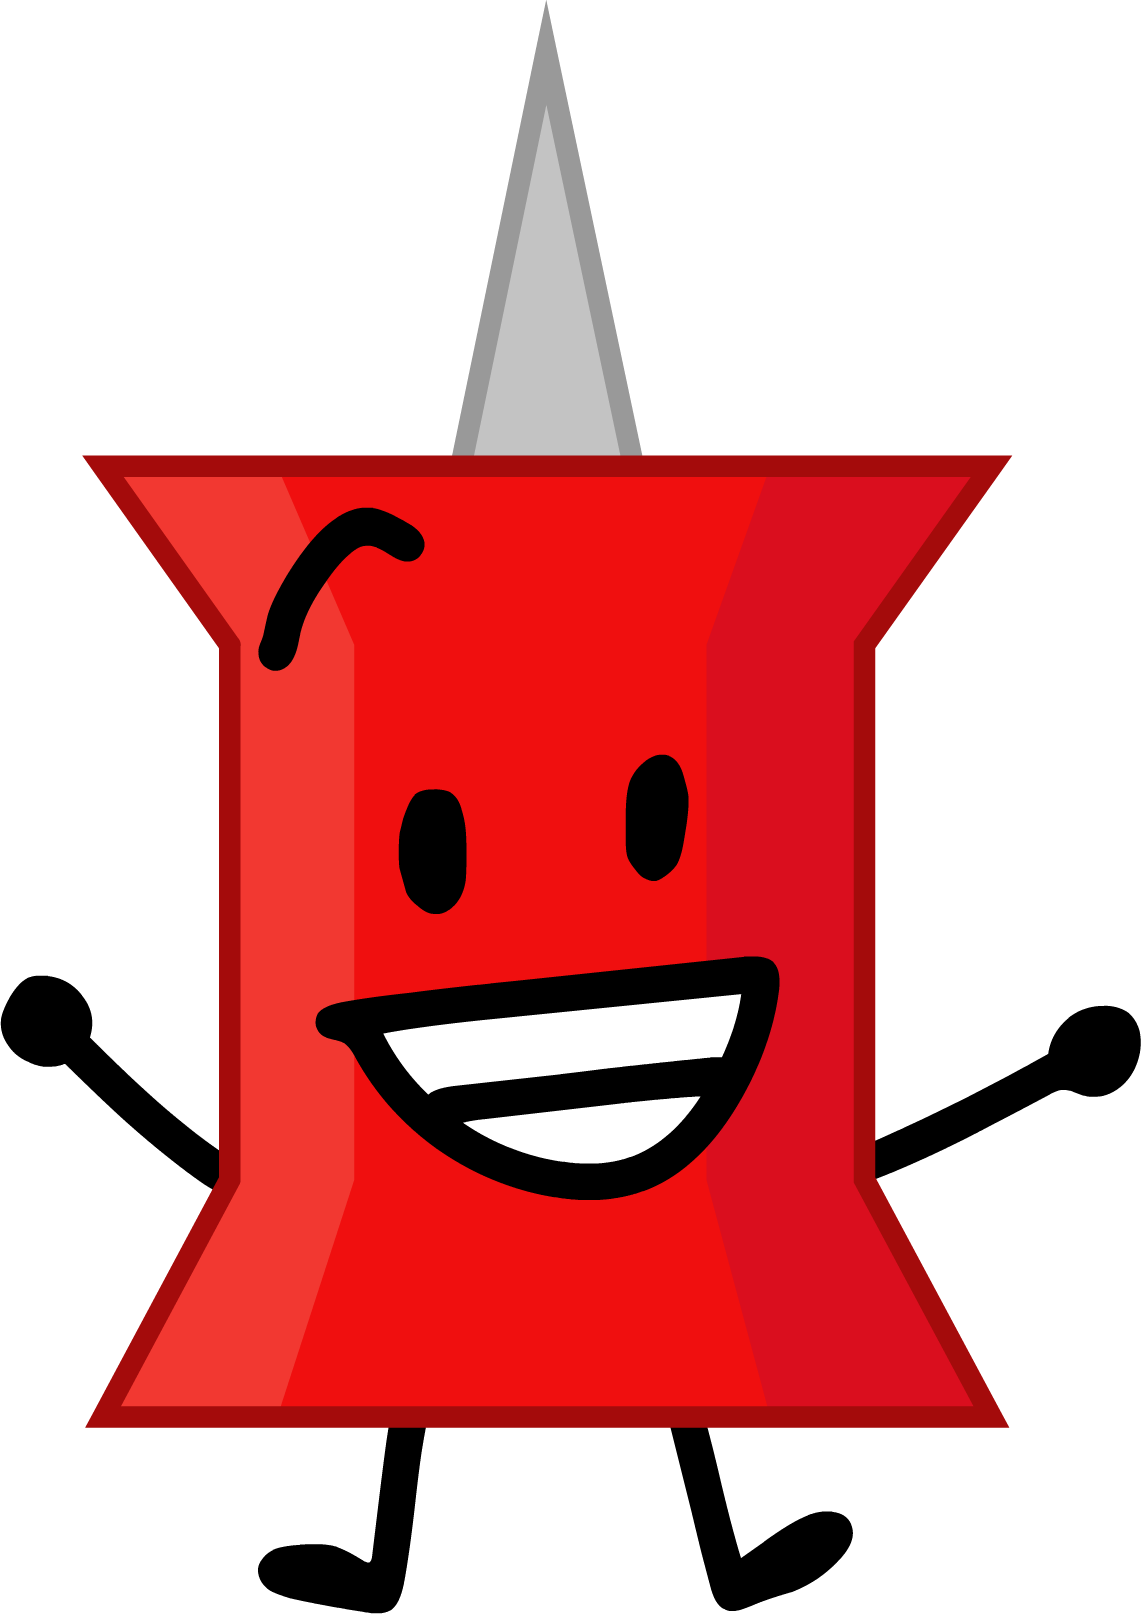 Bfdi Assets png images